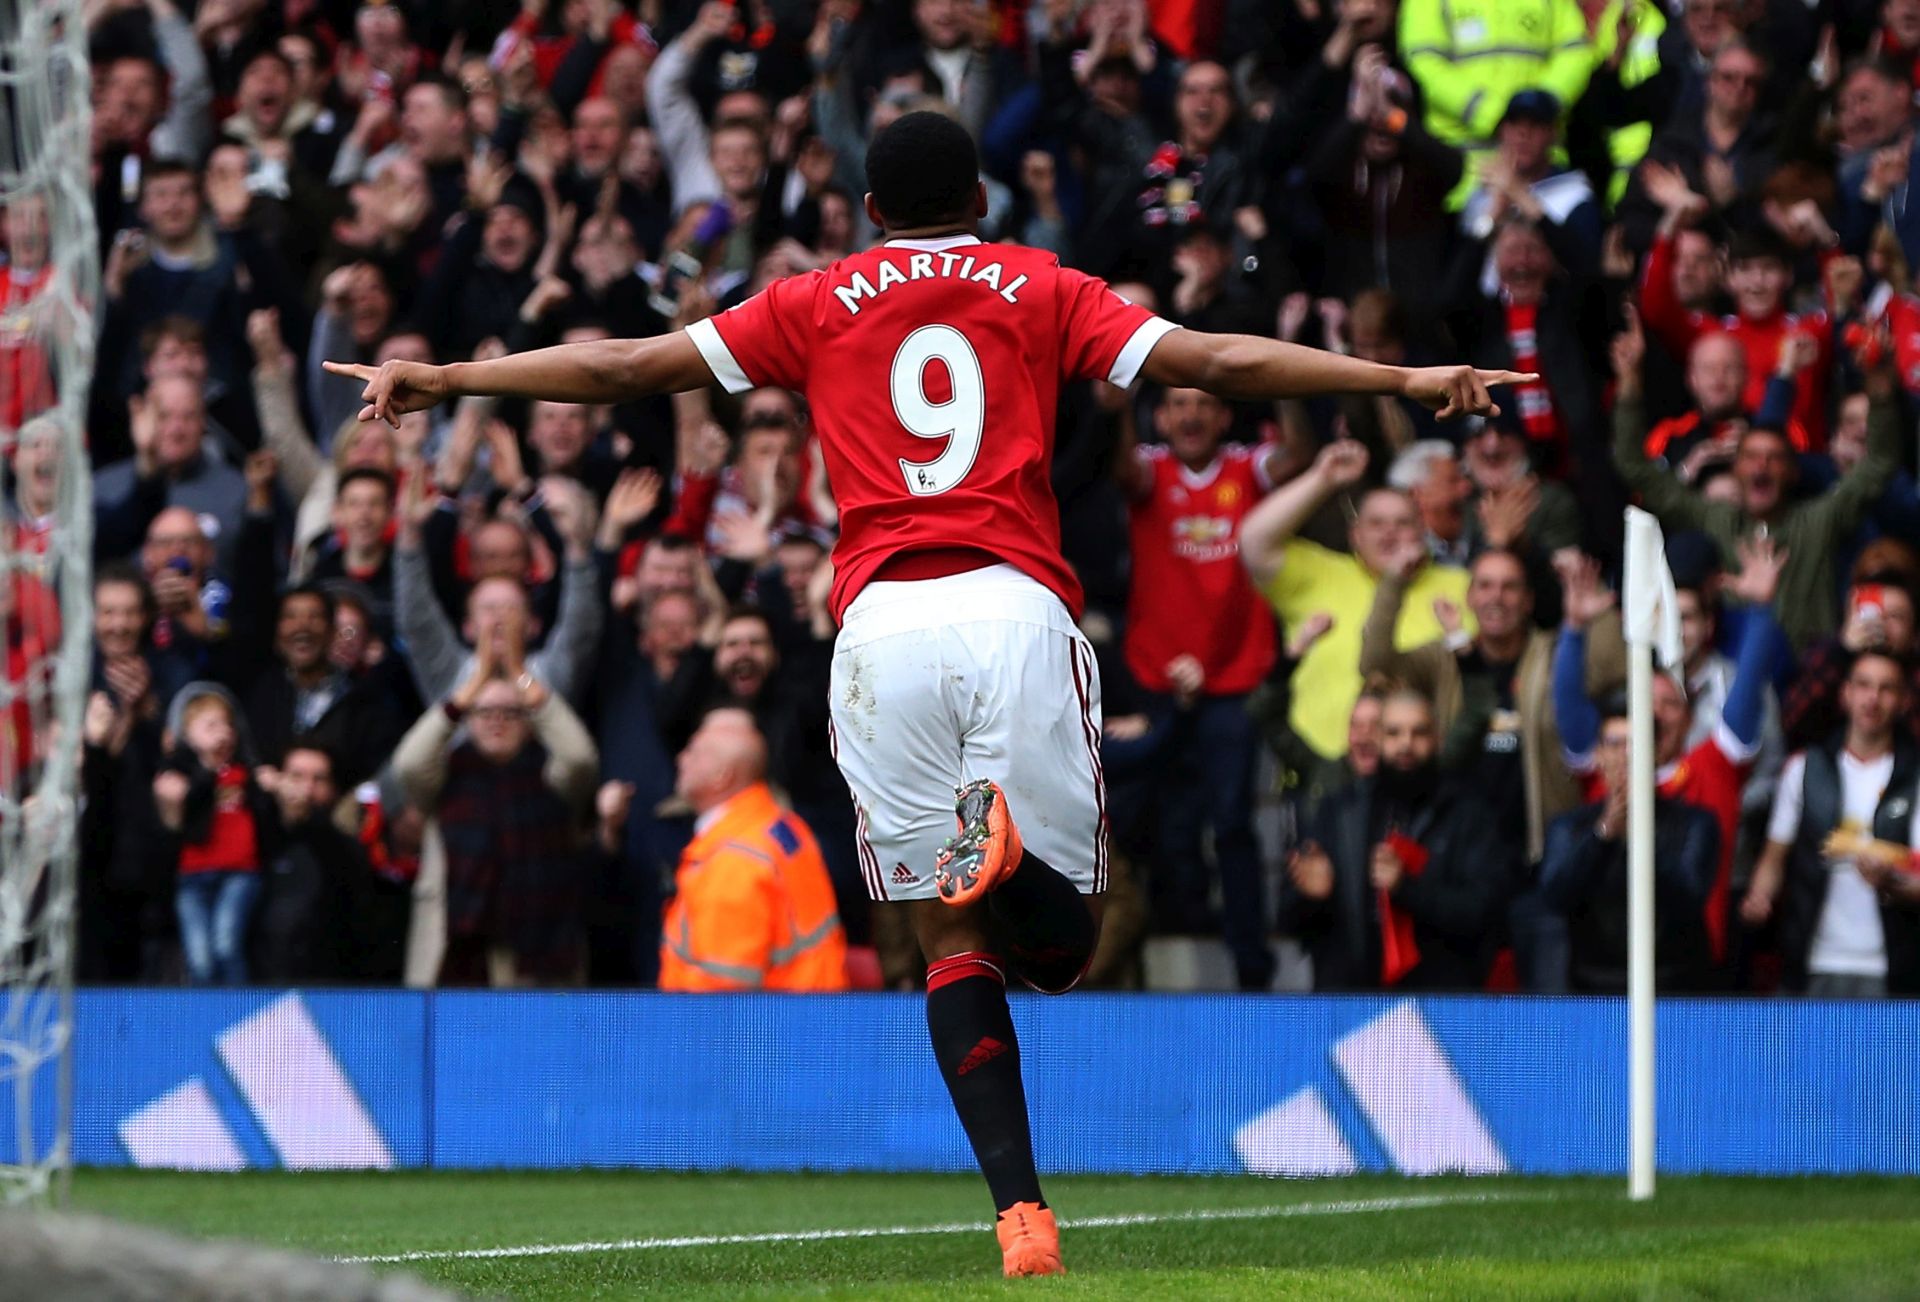 epa05242365 Manchester United's Anthony Martial celebrates scoring during the English Premier League soccer match between Manchester United and Everton at Old Trafford Stadium, Manchester, Britain, 3 April 2016.  EPA/Nigel Roddis EDITORIAL USE ONLY. No use with unauthorized audio, video, data, fixture lists, club/league logos or 'live' services. Online in-match use limited to 75 images, no video emulation. No use in betting, games or single club/league/player publications.